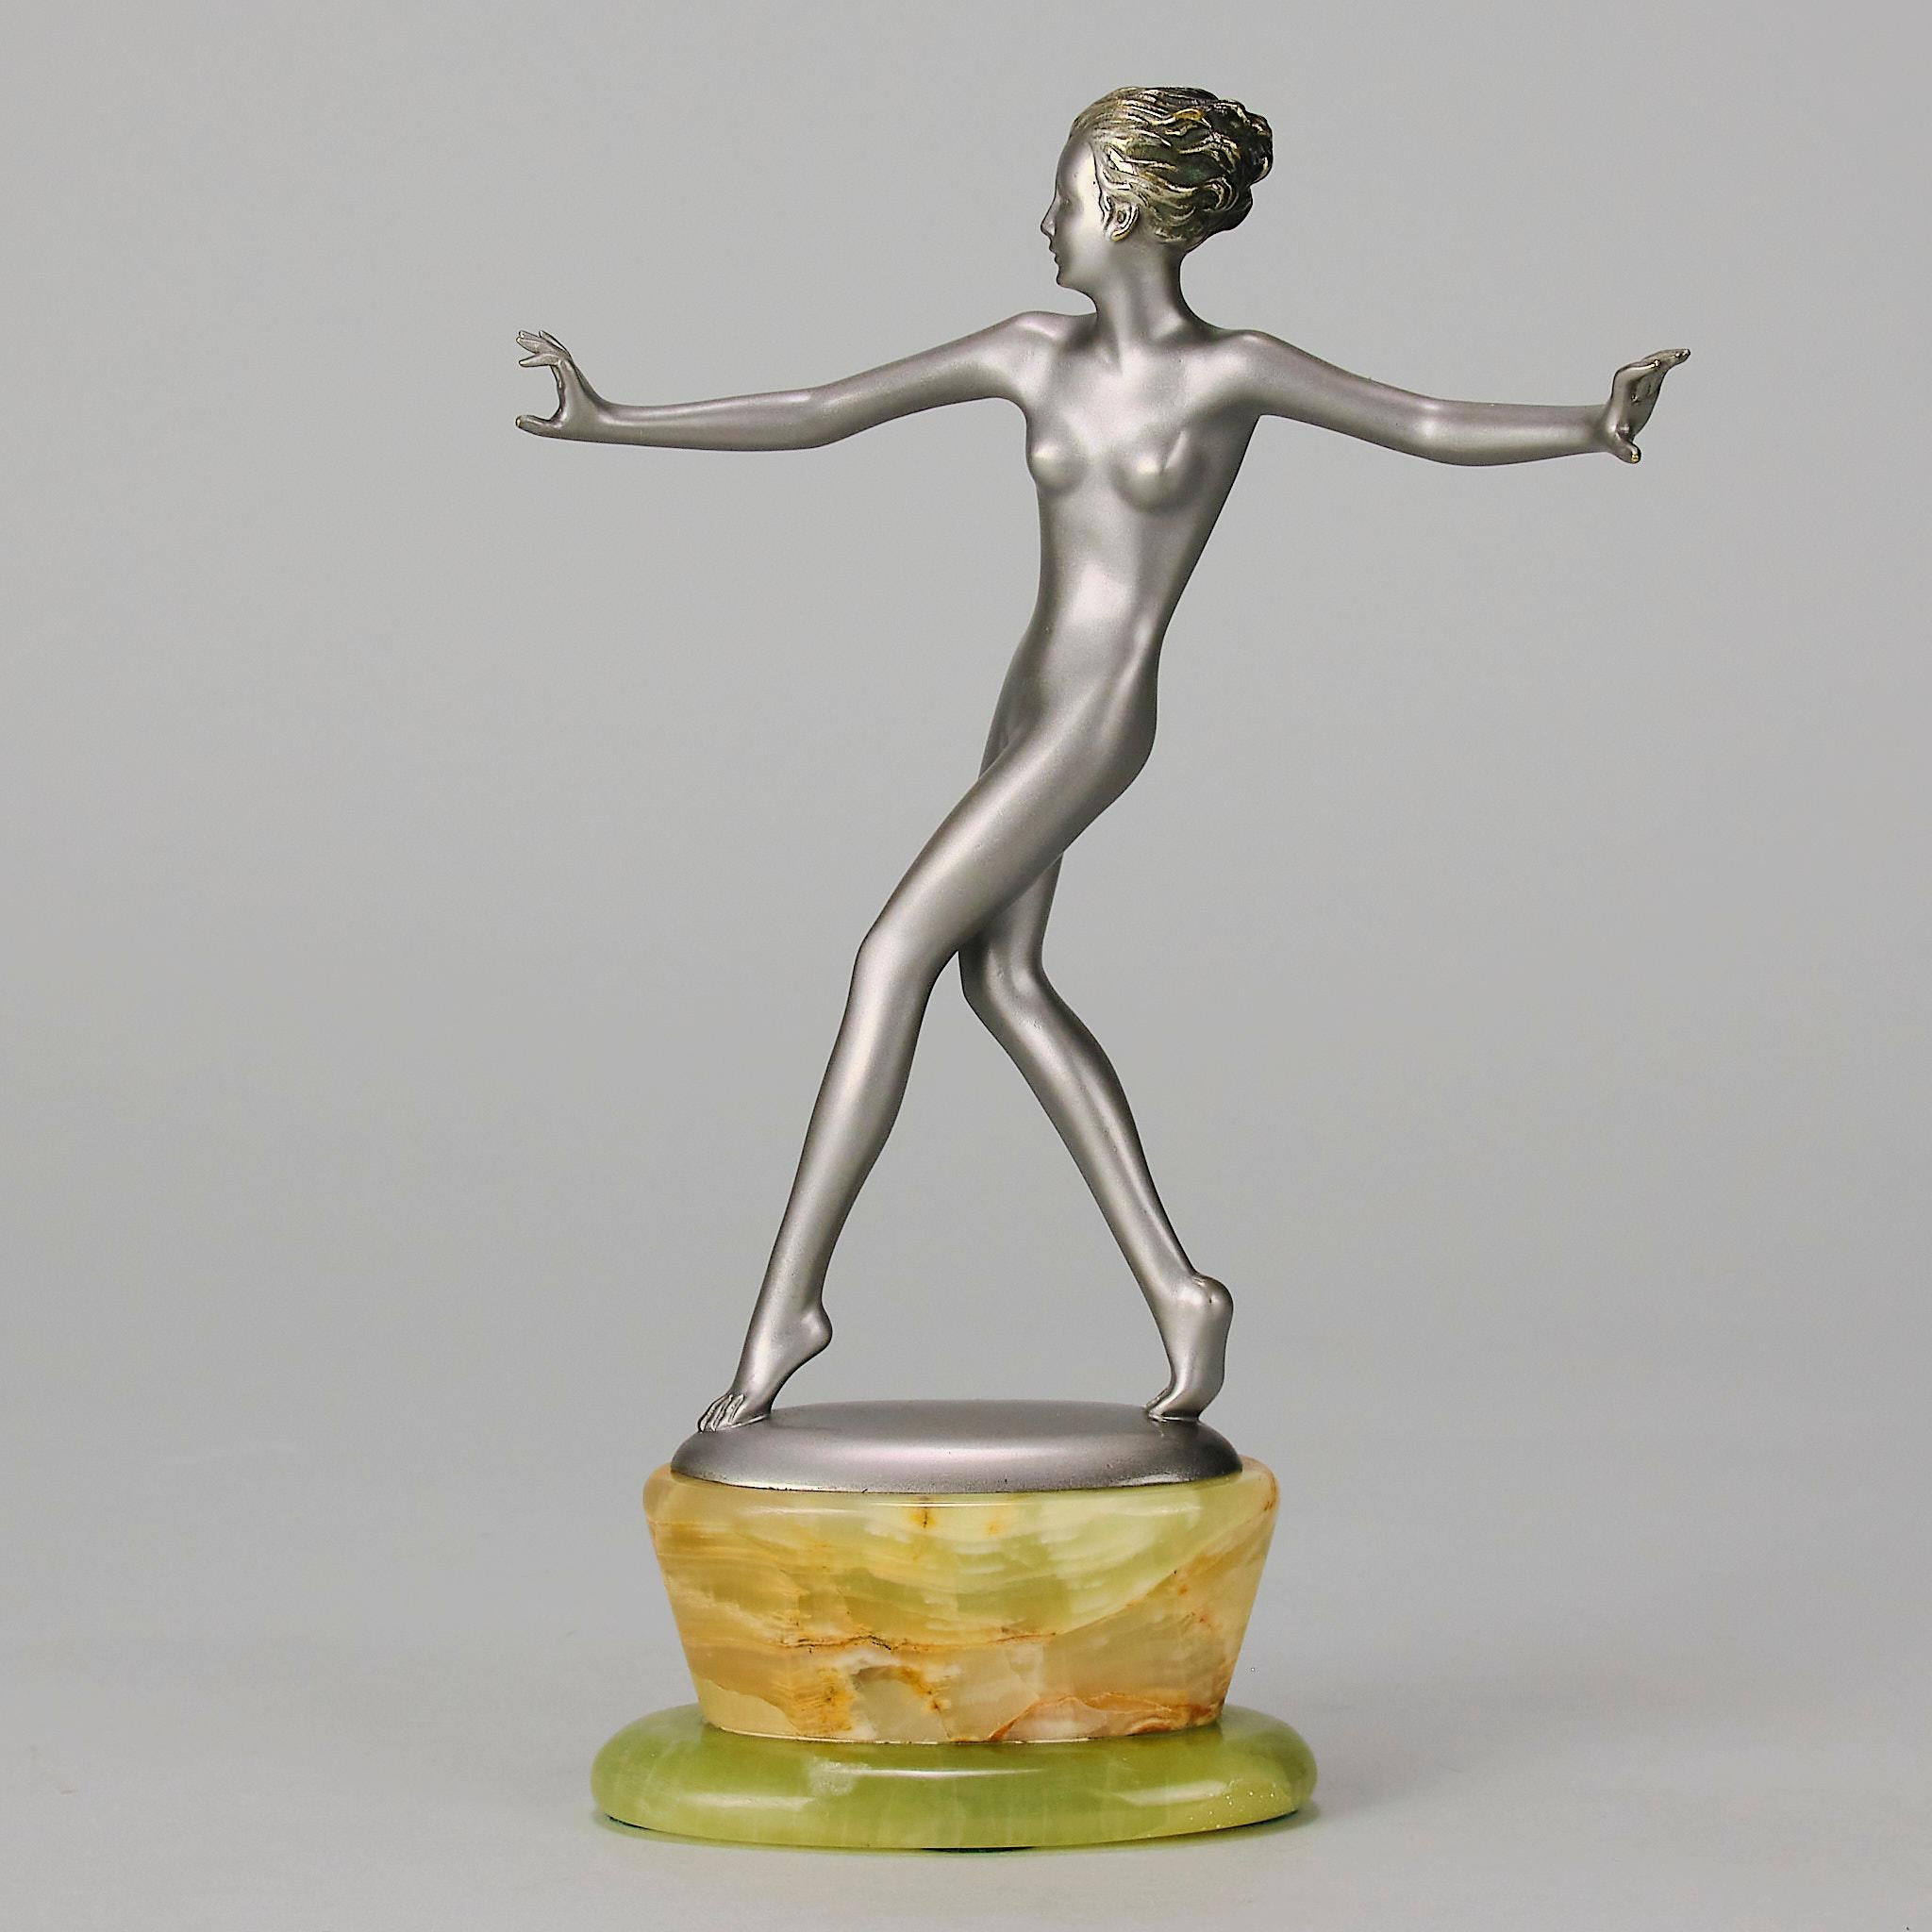 A very fine early 20th Century Art Deco cold painted bronze figure of a naked beauty in the midst of a graceful movement, with excellent colour and fine hand finished detail, raised on a shaped onyx base and signed Lorenzl

ADDITIONAL